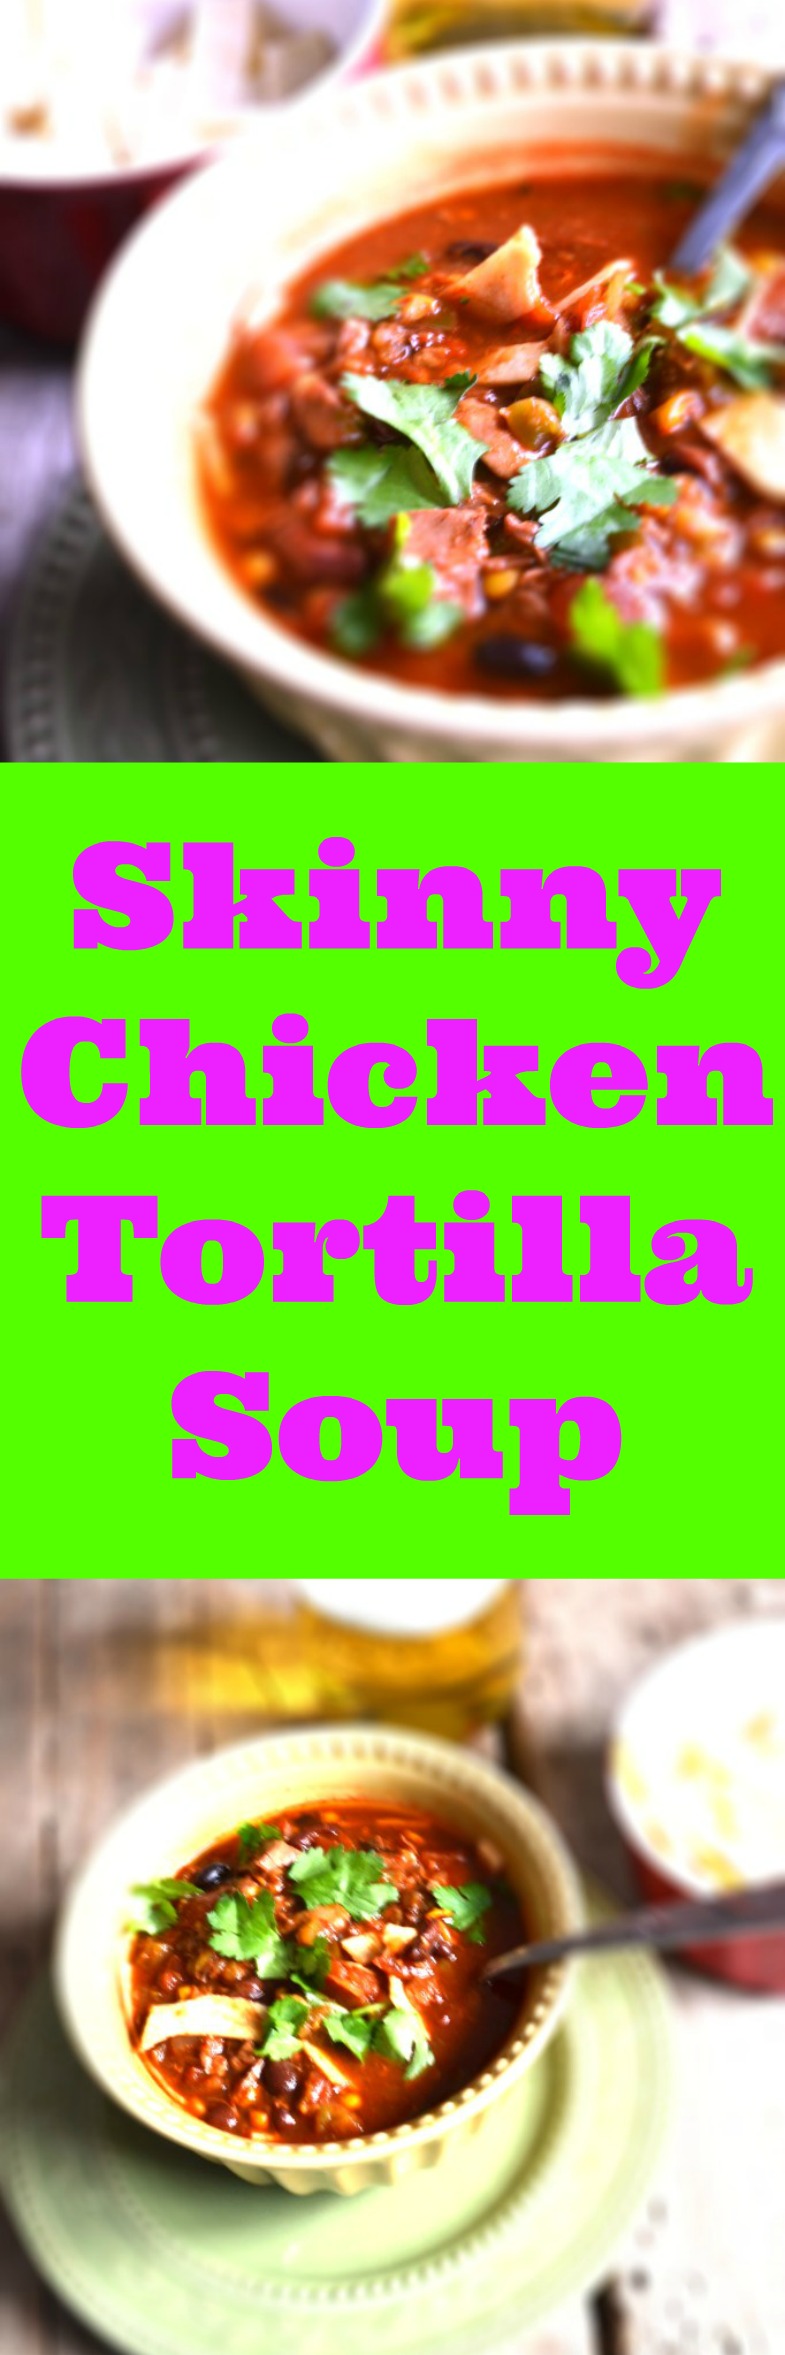 You'll want to try this Chicken Tortilla Soup Recipe when a cold or flu hits you. You absolutely should try this natural health remedy to cure your cough and cold. The reason why is because of the natural chicken broth.